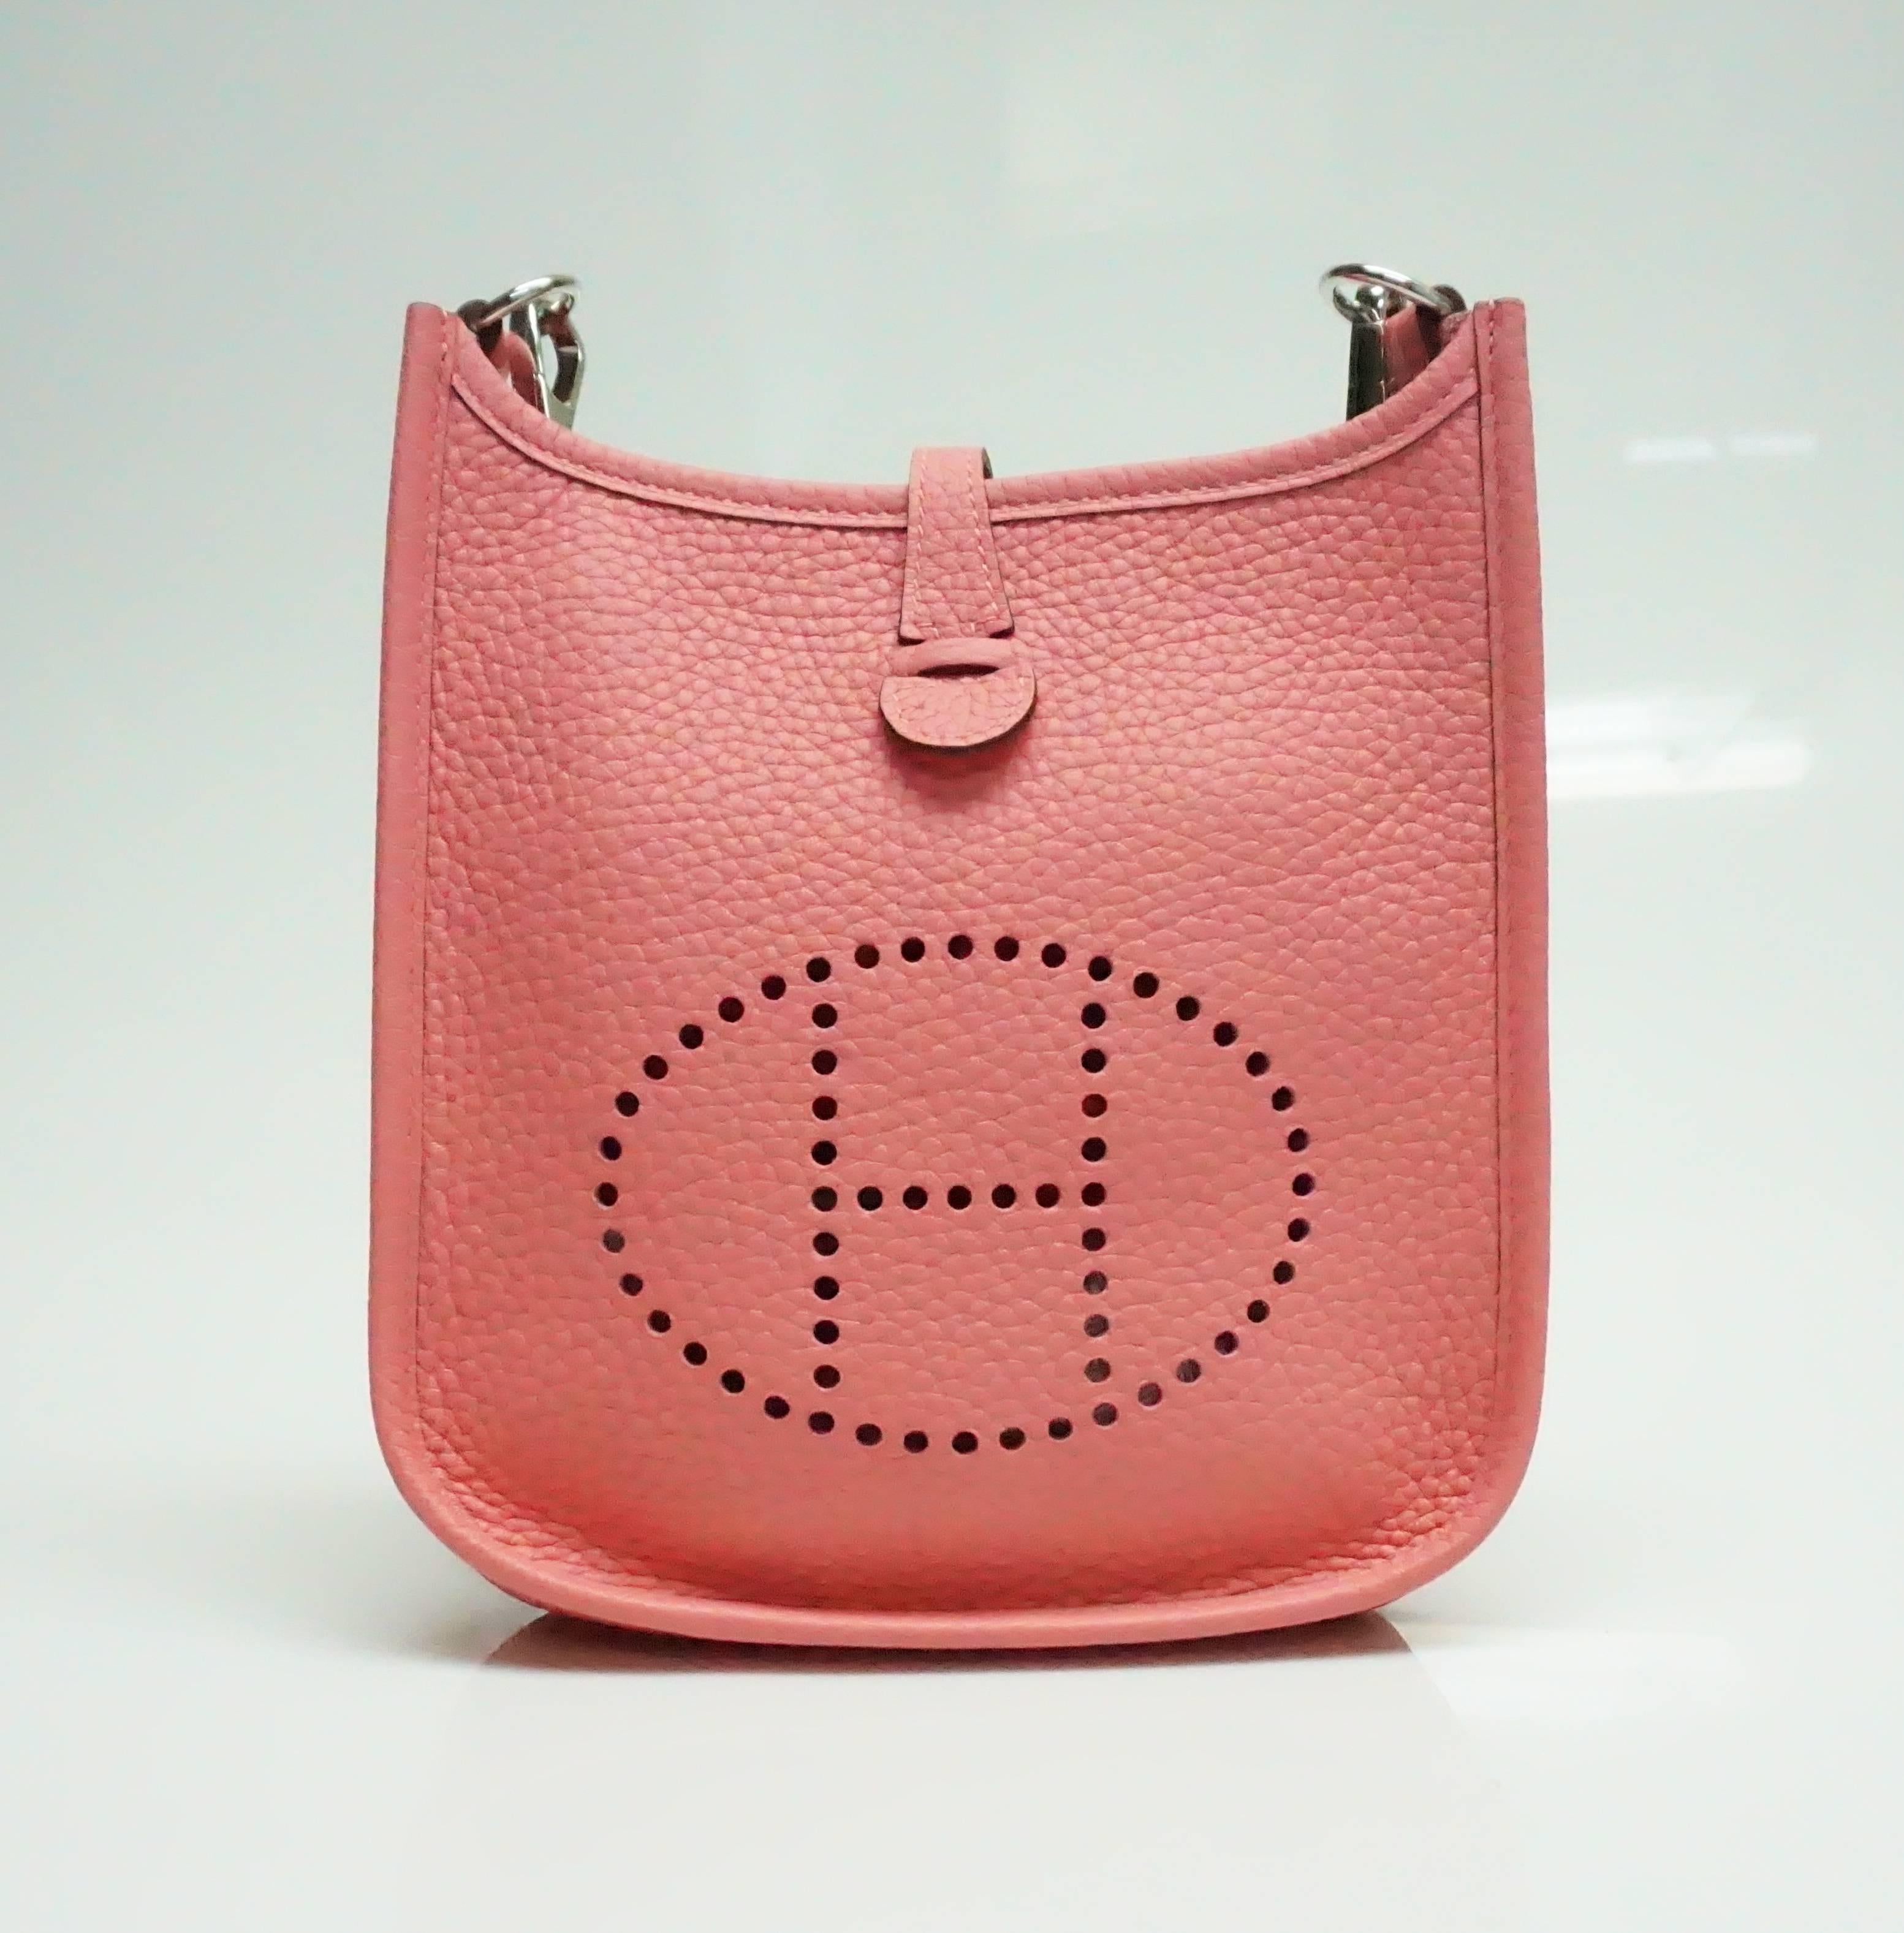 This beautiful Hermes TPM Mini Evelyne crossbody is made of Clemence leather in the color Rose Azalee. This bag is new and was never carried and comes with the box and duster.

Measurements
Length: 7